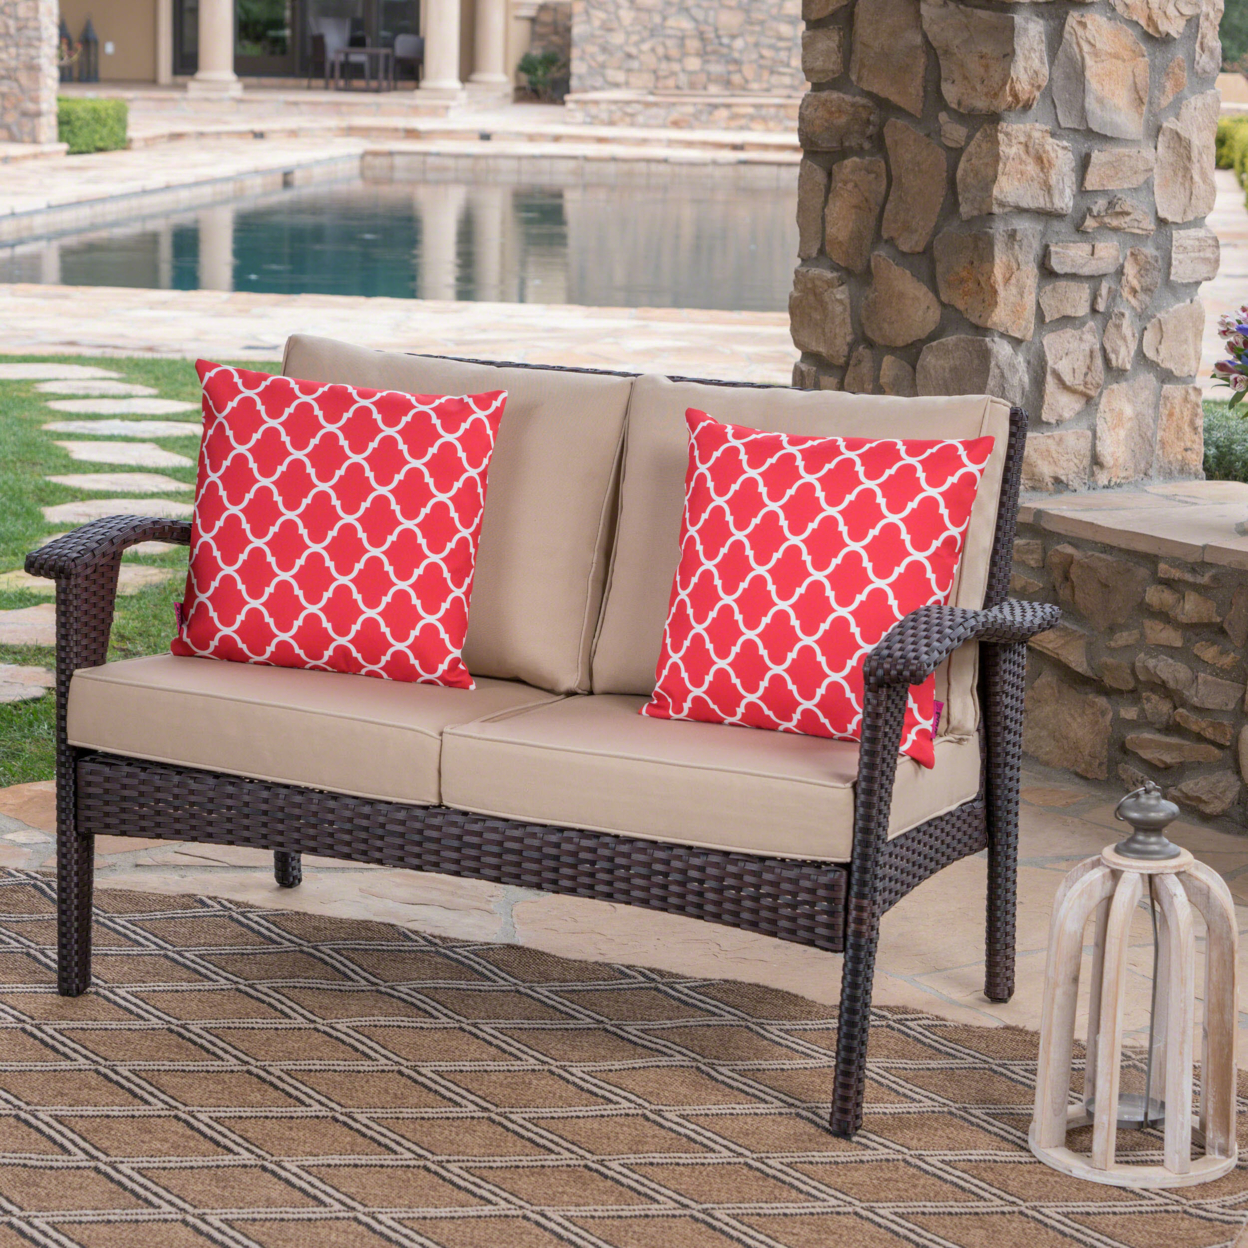 Hilary Outdoor Brown Wicker Loveseat With Water Resistant Cushions - Gray/Silver